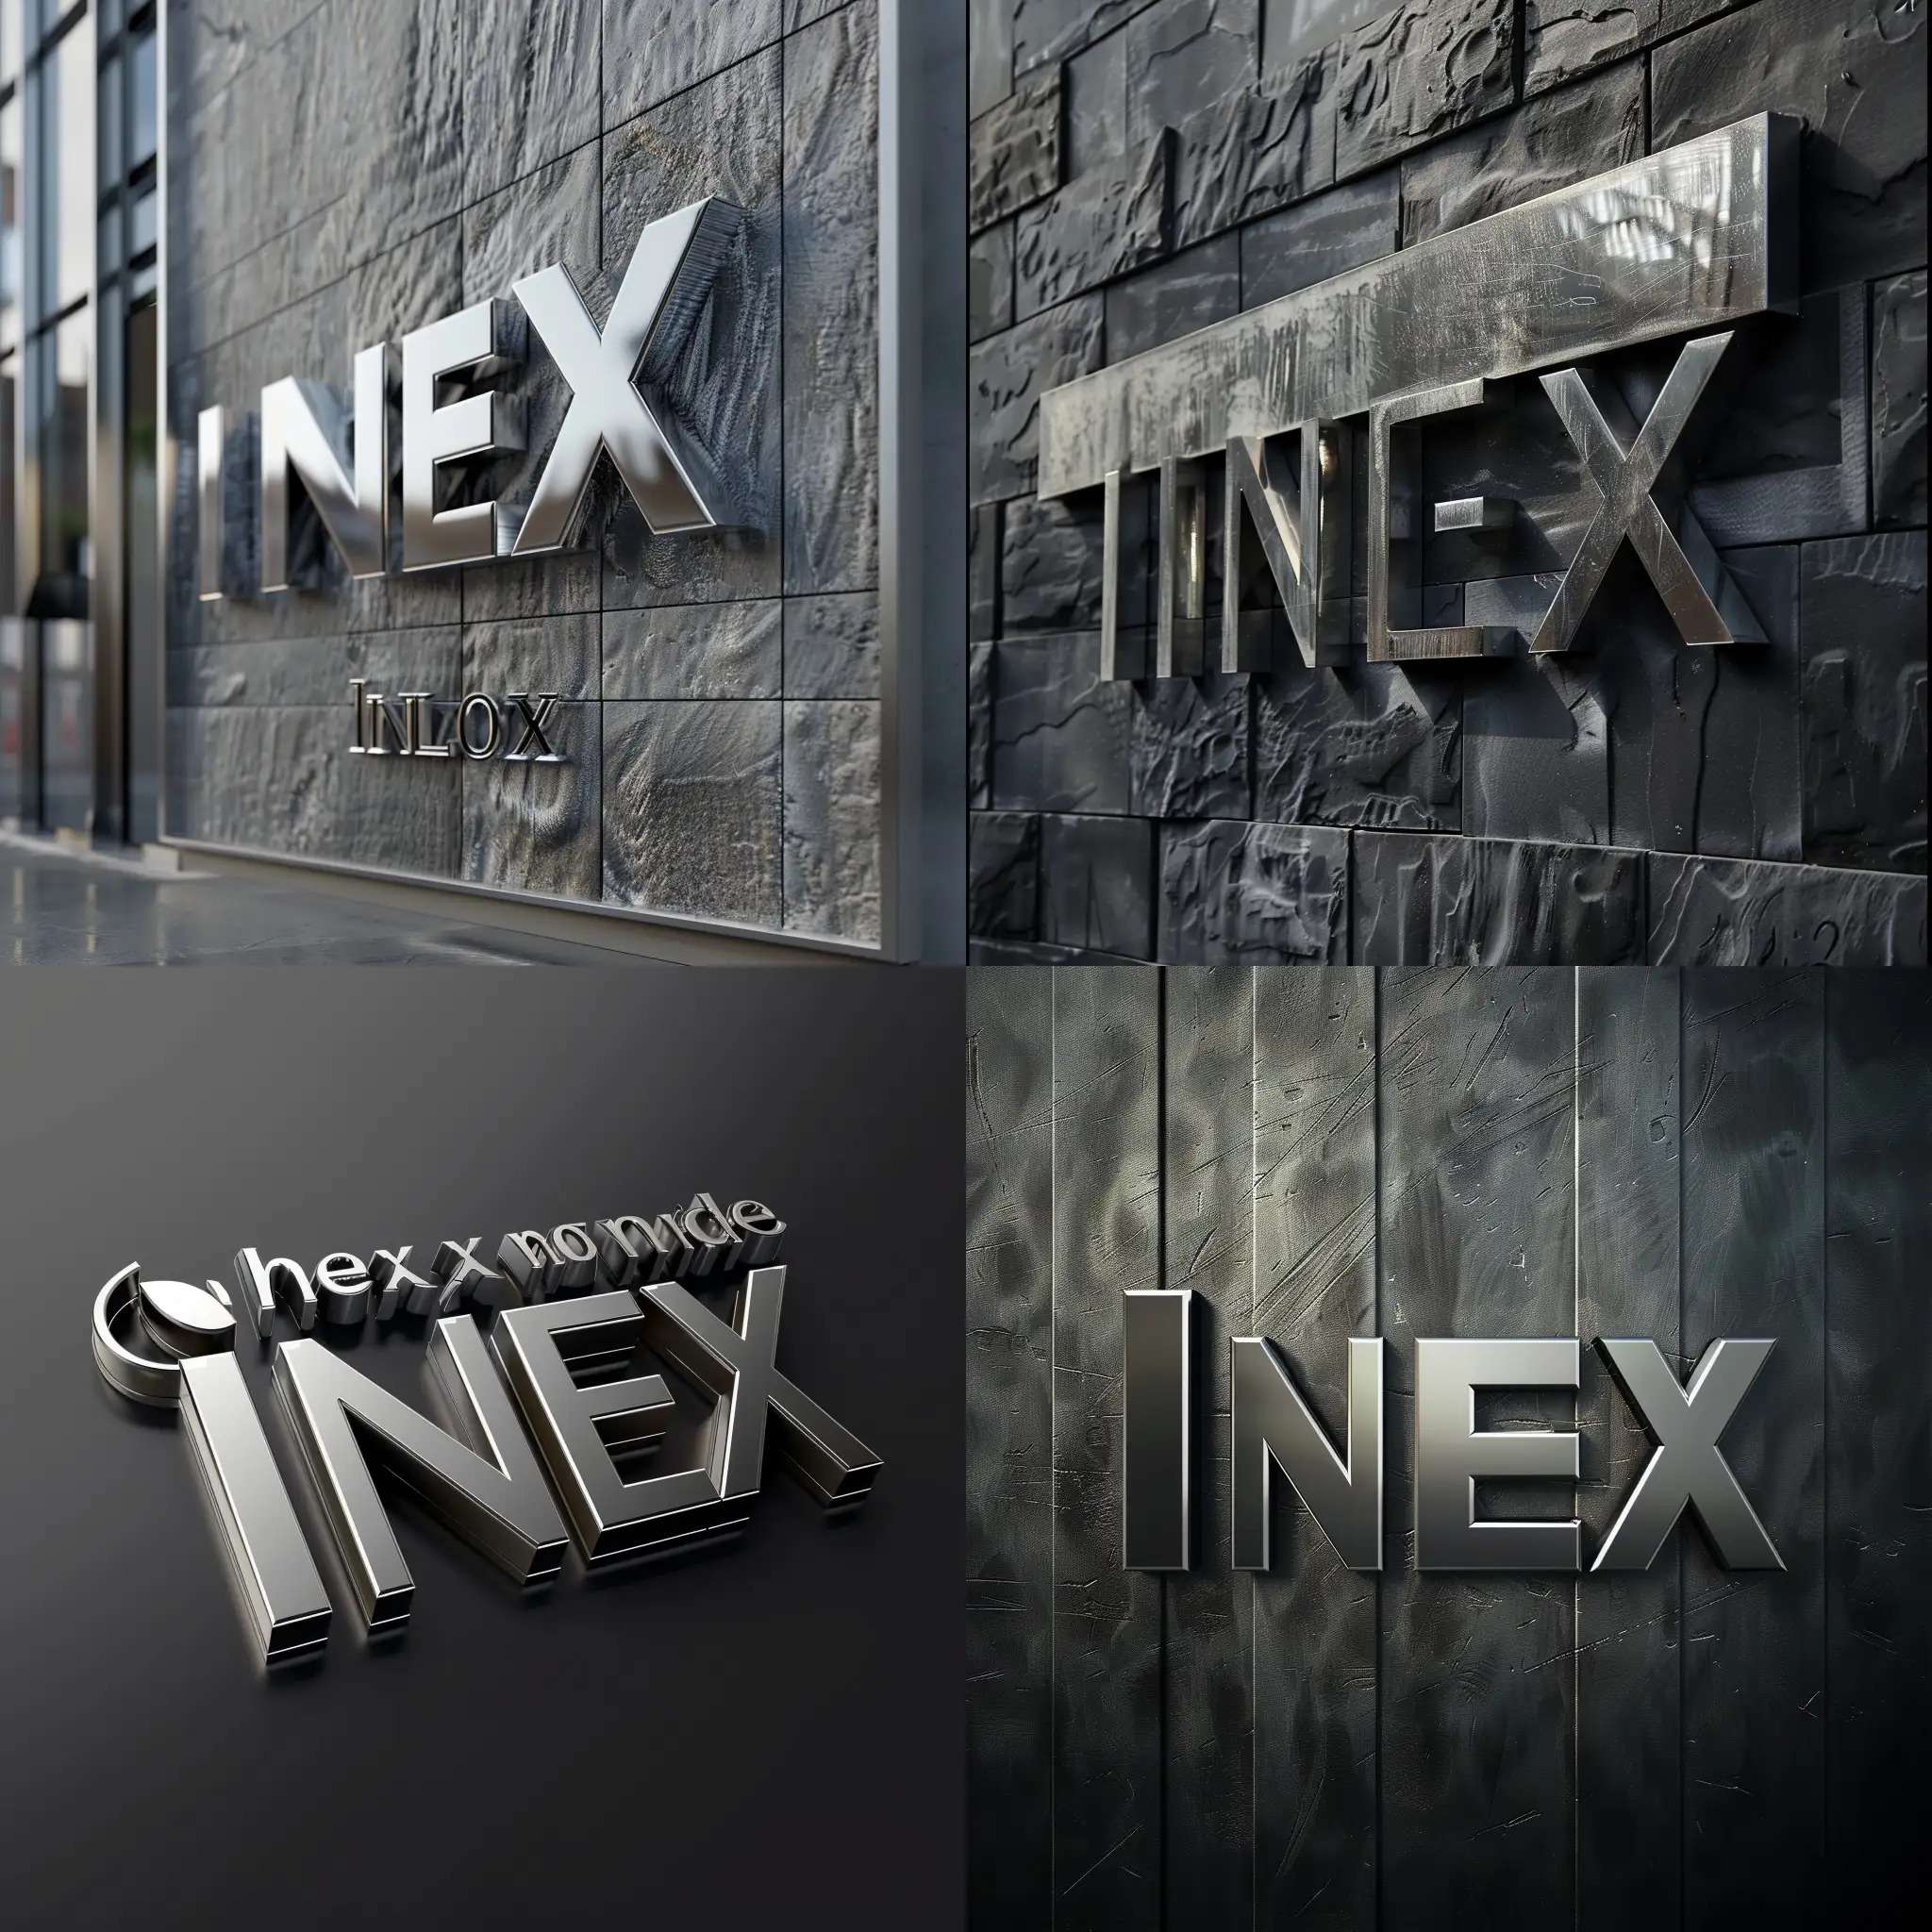 Reliable-and-Friendly-INEX-Logo-in-Metall-Silver-Letters